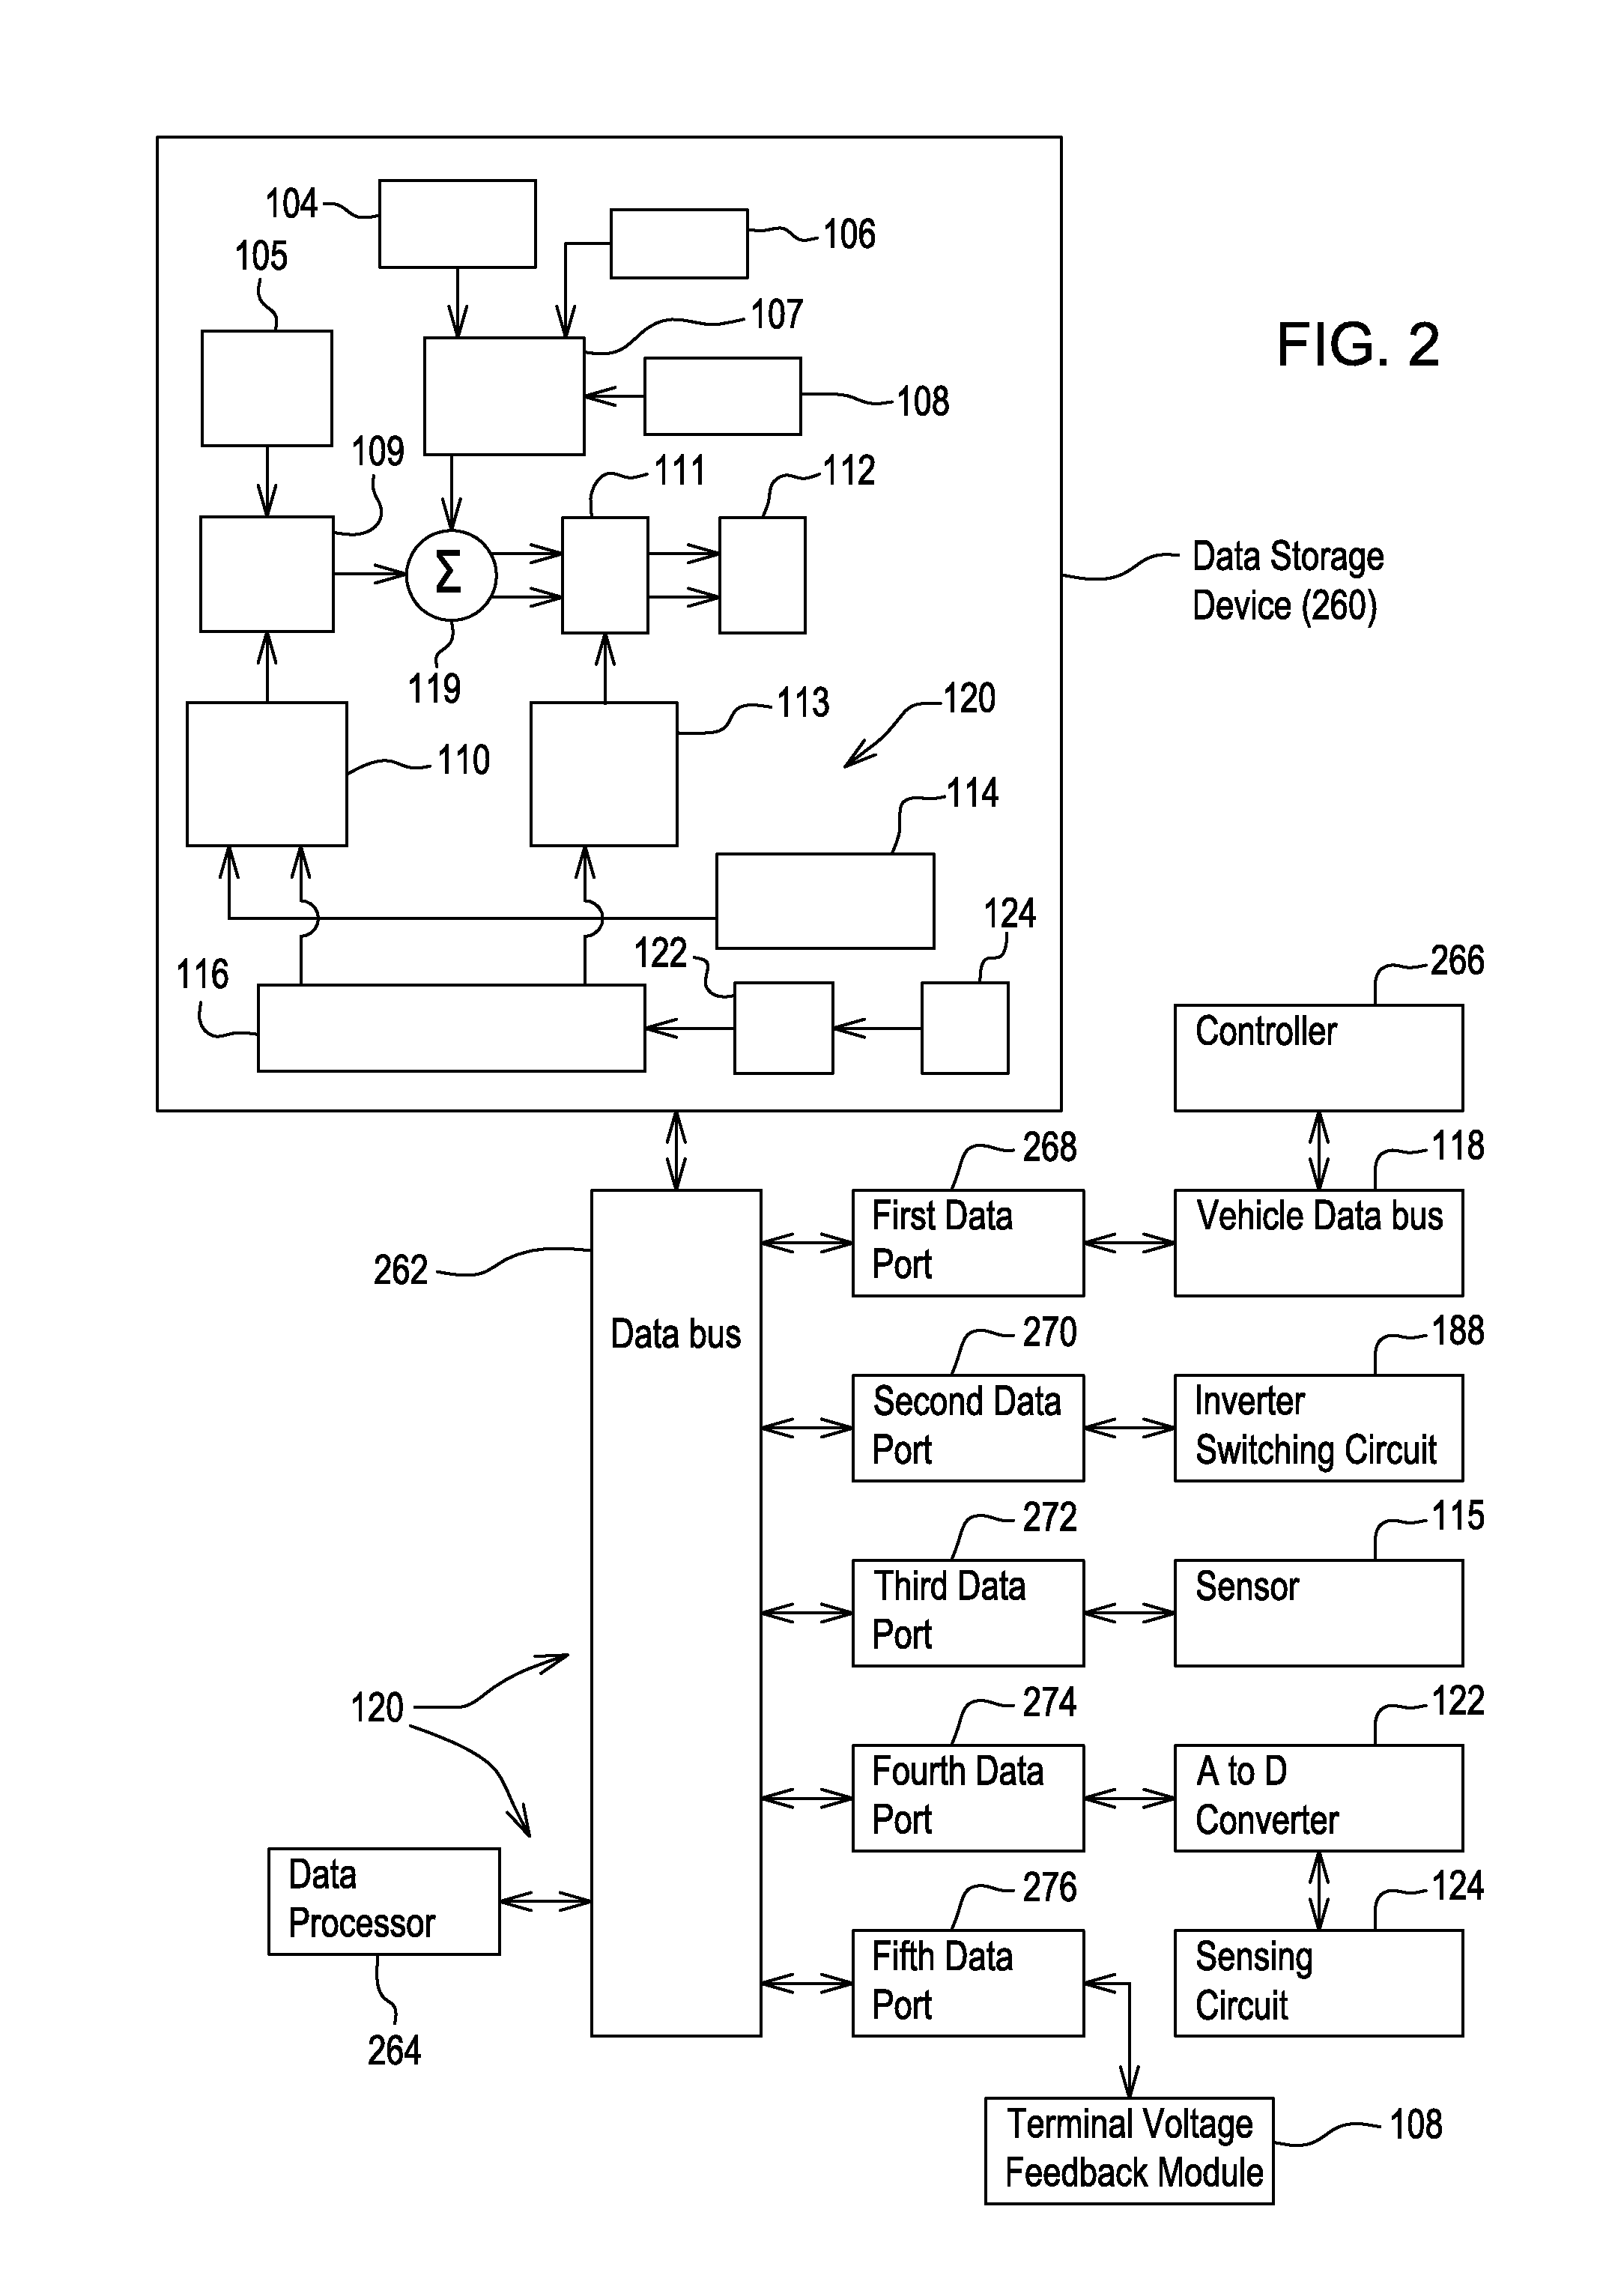 Method and system for controlling an electric motor with variable switching frequency at variable operating speeds